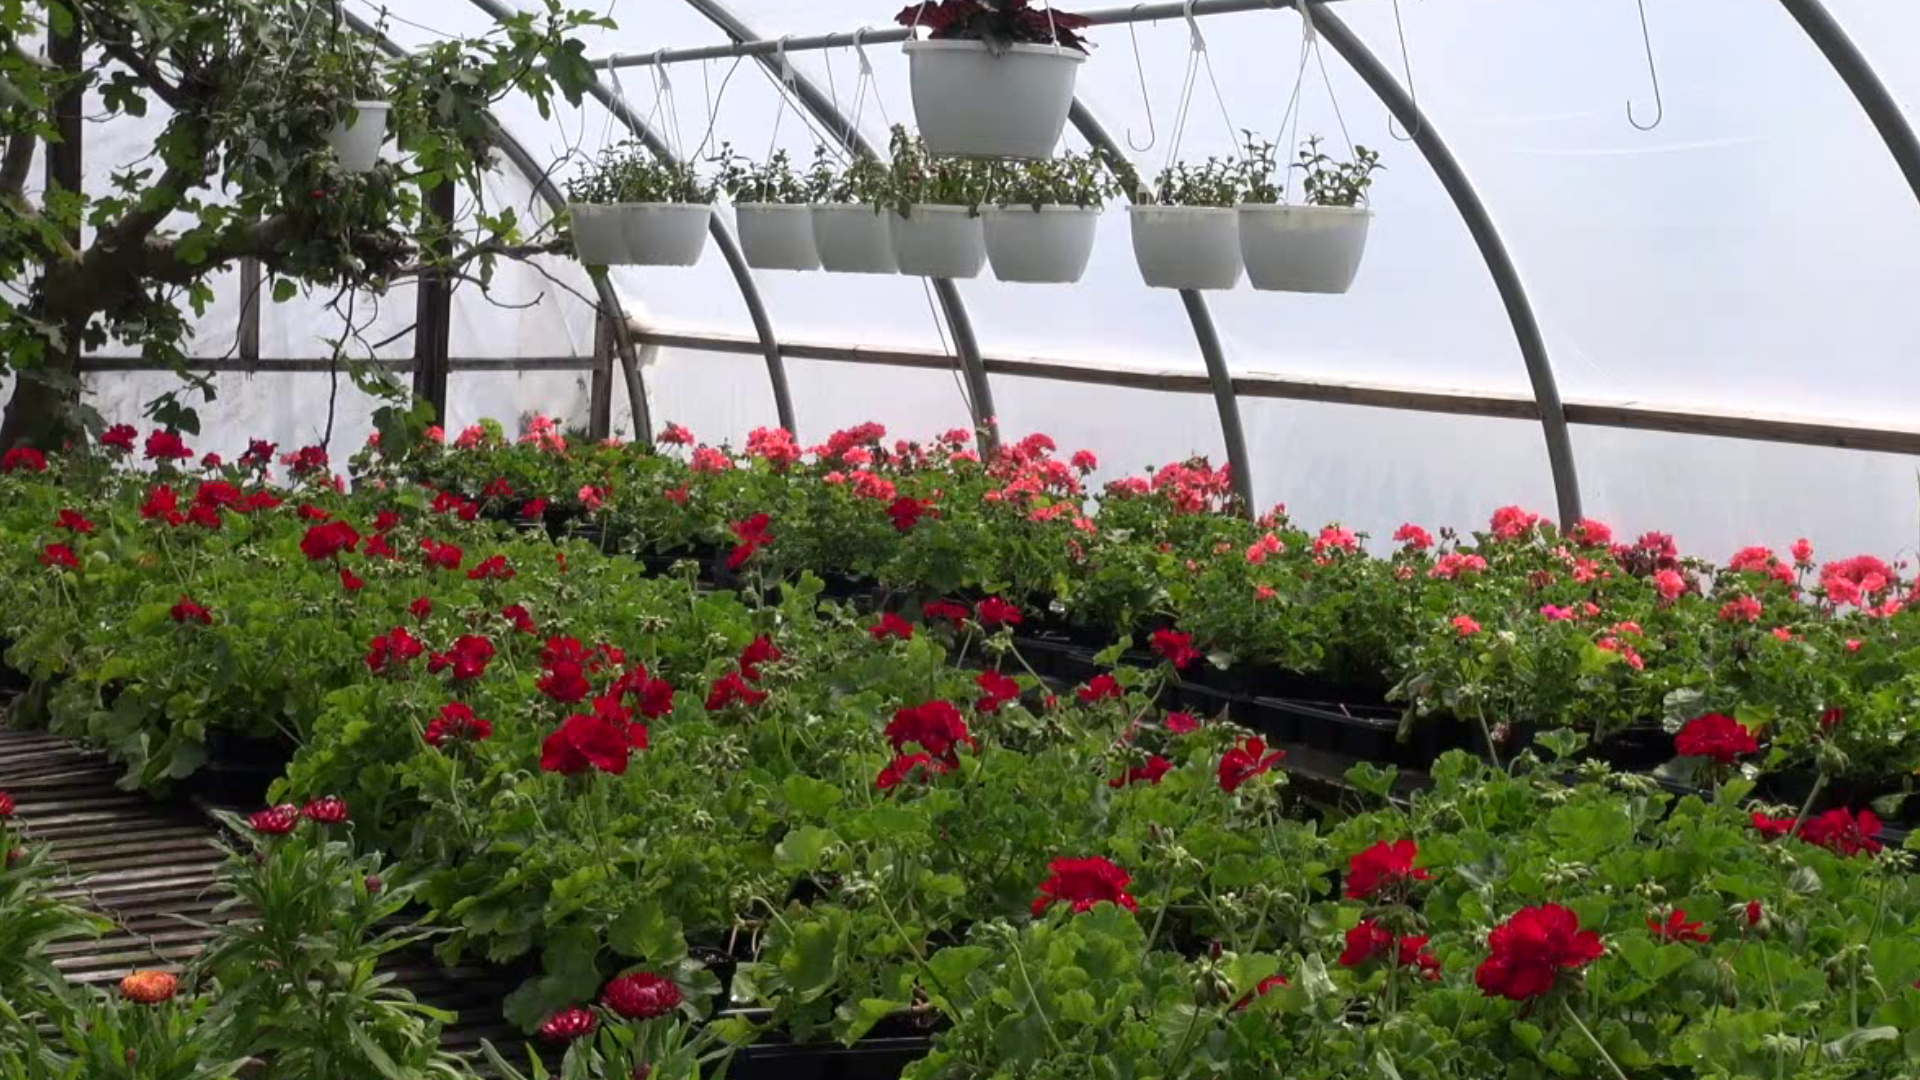 The owner of a greenhouse in Lackawanna County has received a lot of support from customers, so now he is giving back to other organizations in need.